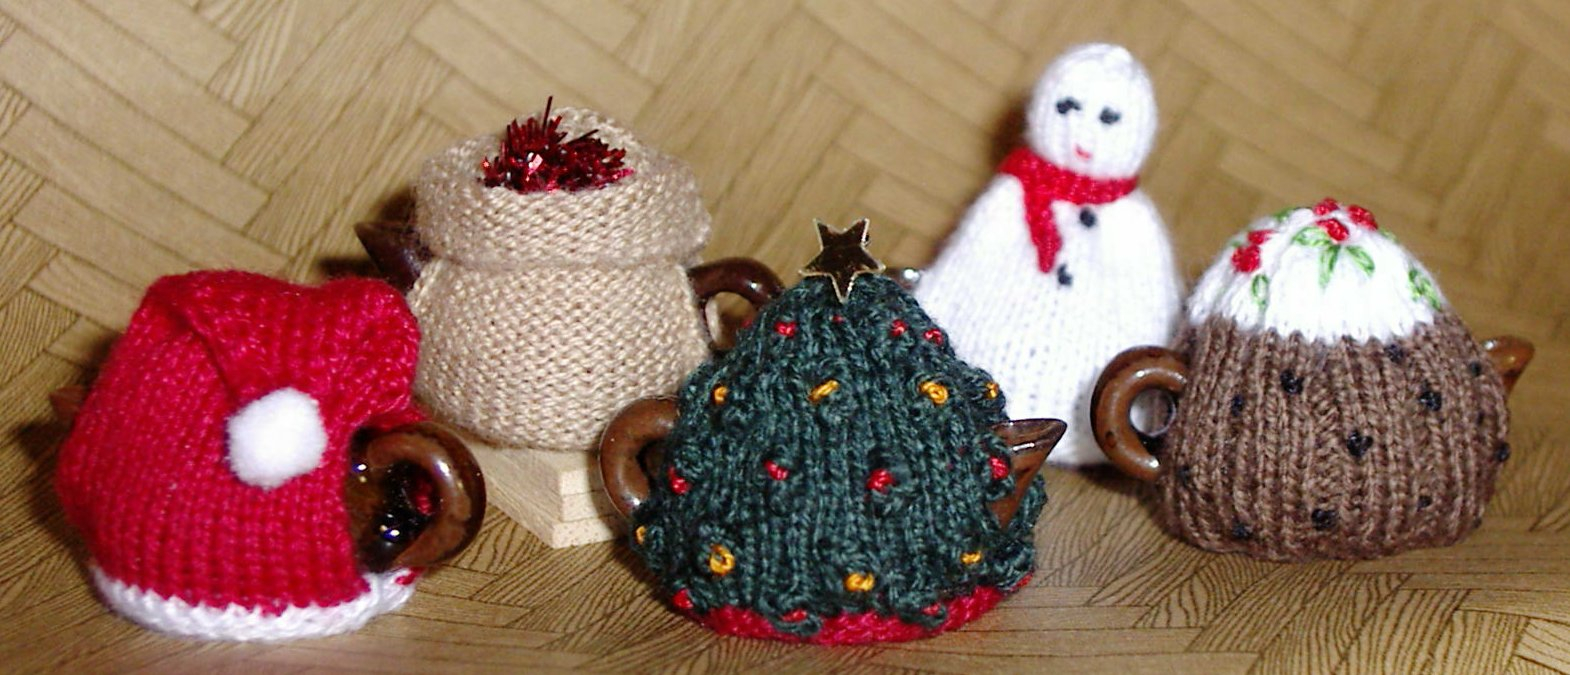 Tea Cosy Knitting Patterns Easy Knitting Patterns For Tea Cosy Patterns Gallery